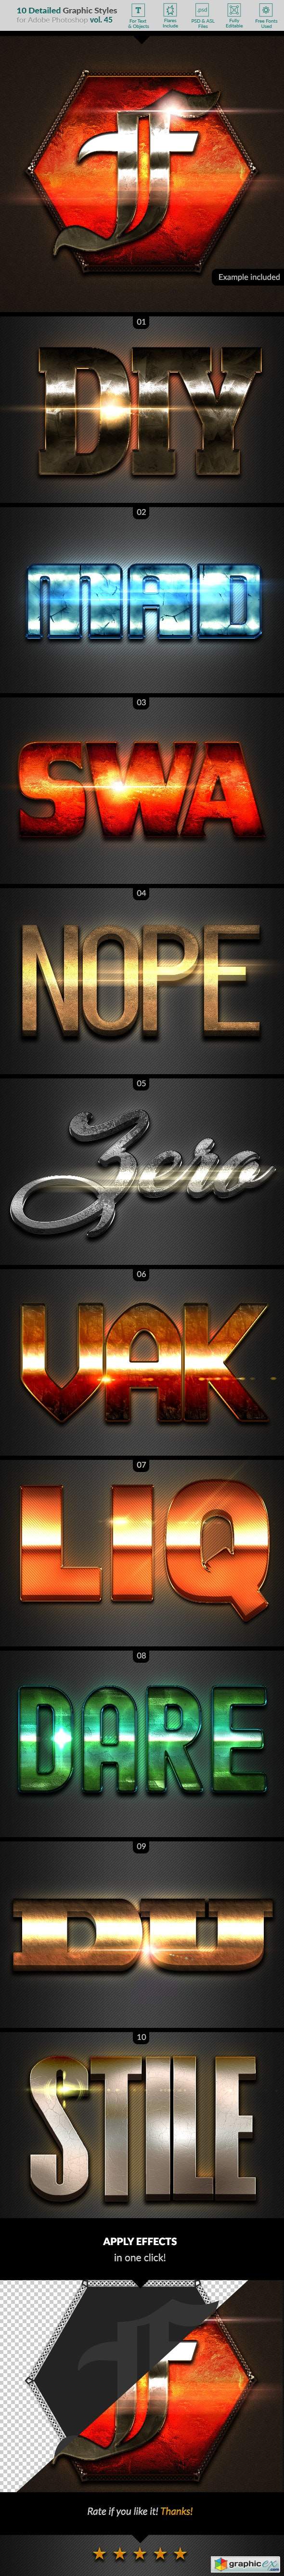  10 Text Effects Vol. 45 